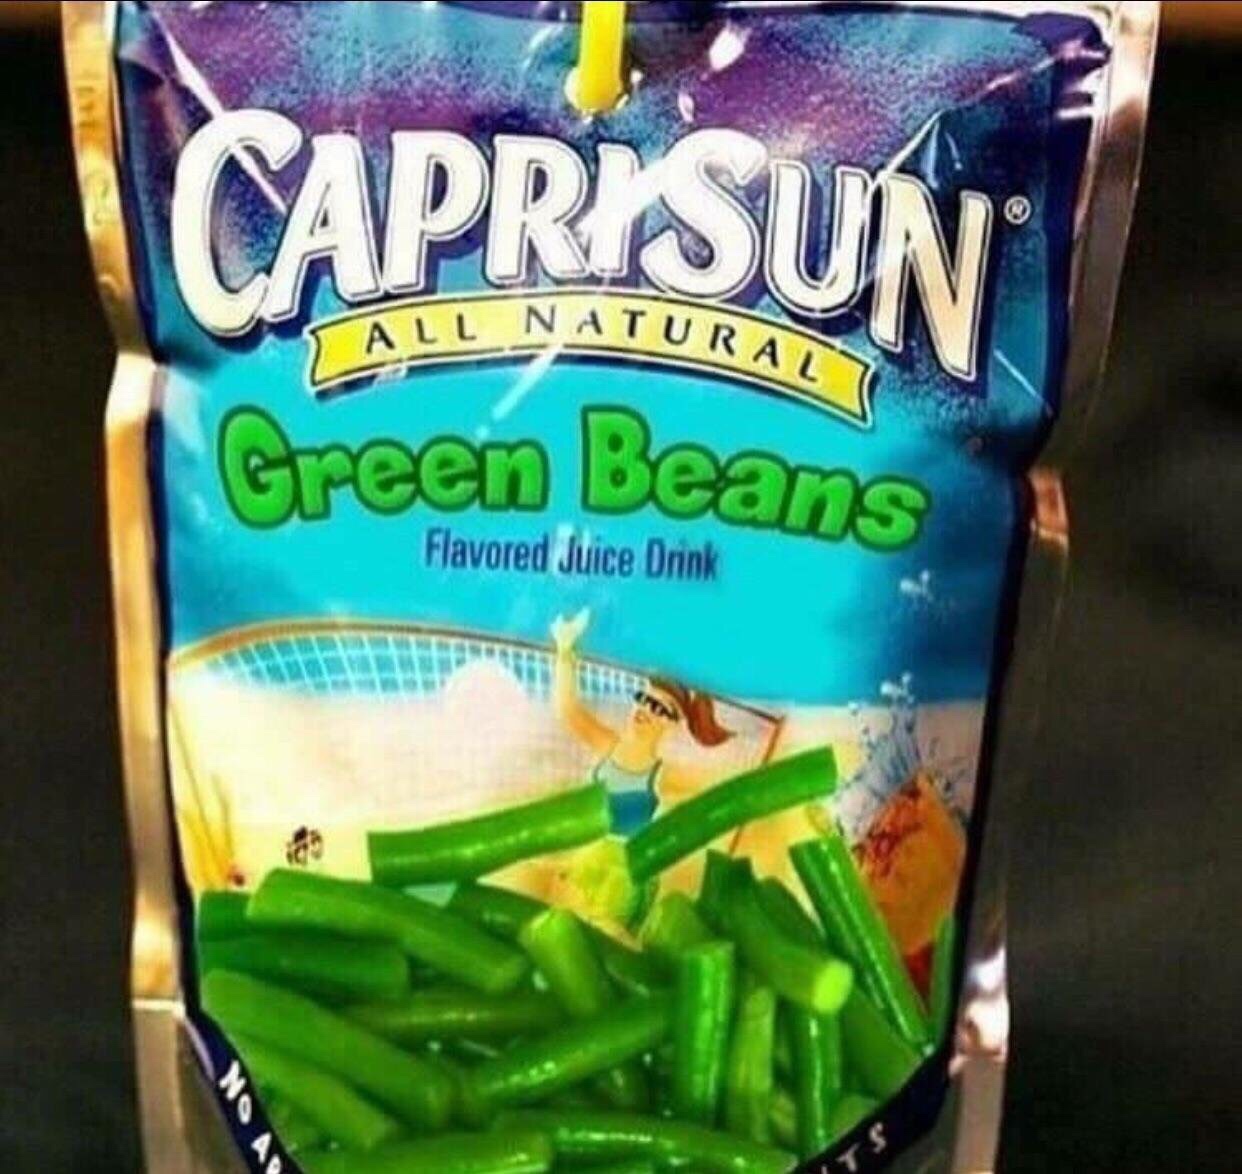 green beans funny - Caprisun Natura Green Beans Flavored Juice Drink